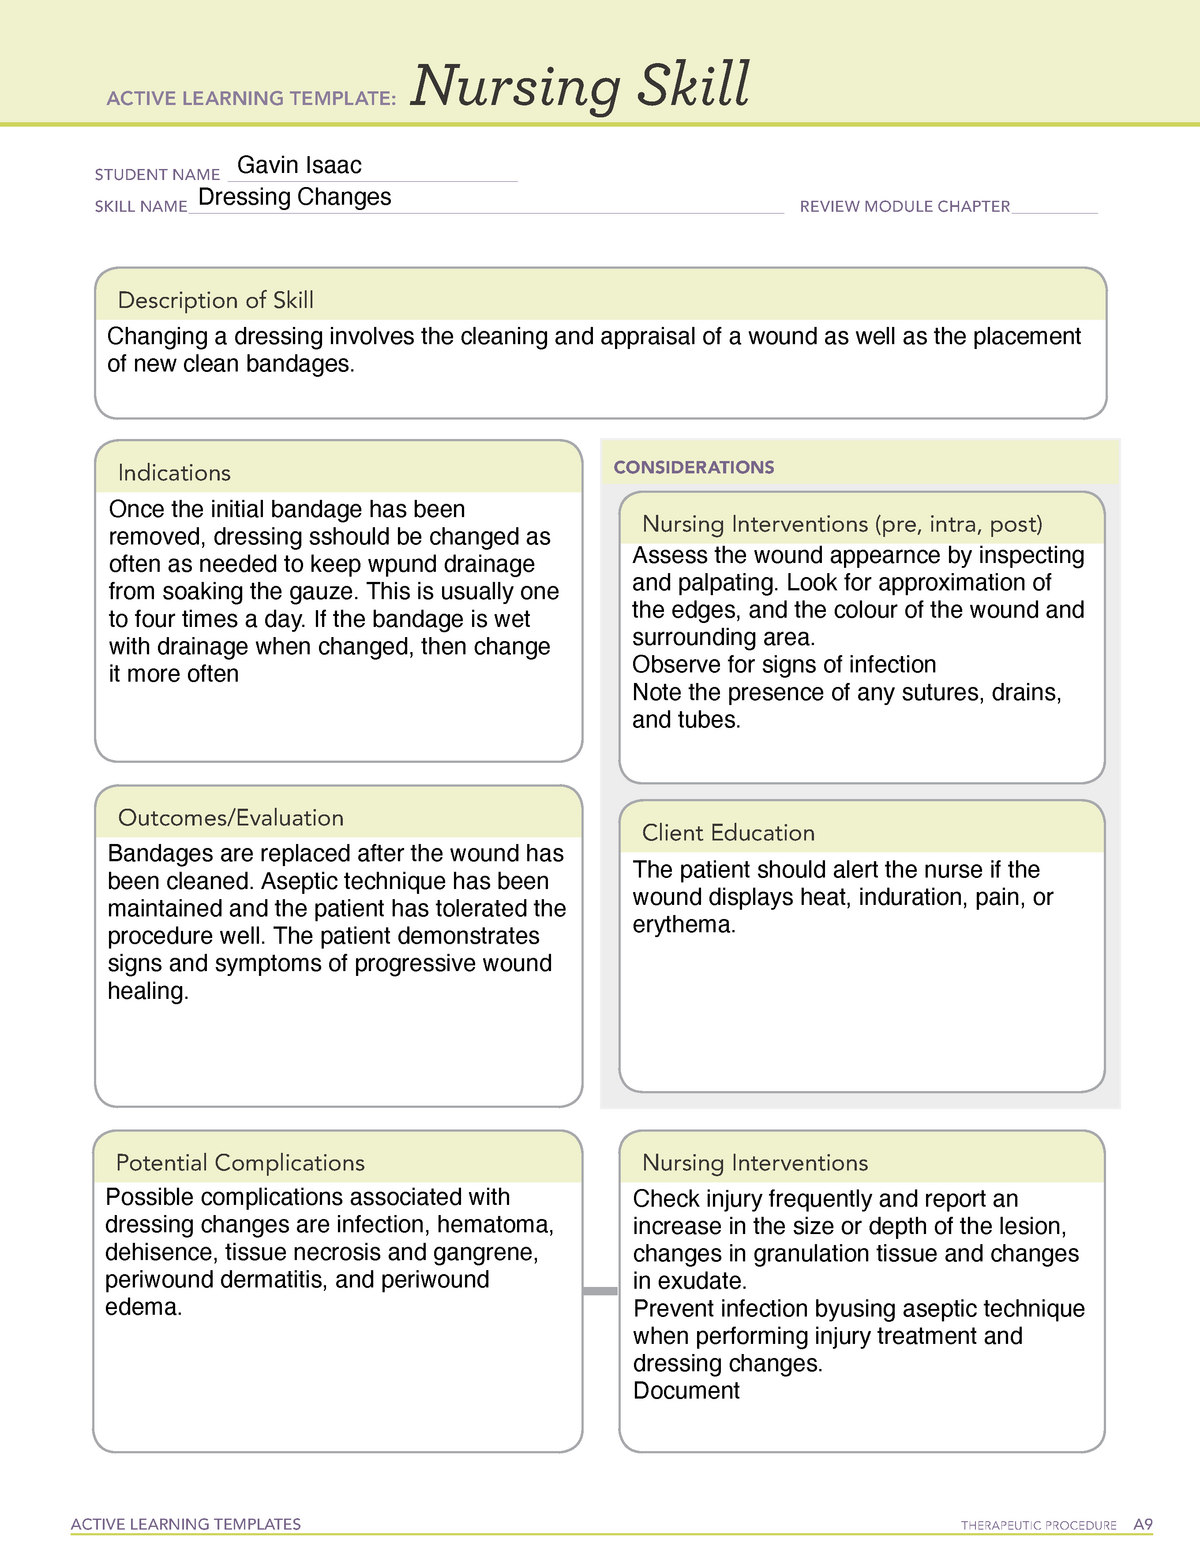 skill-dressing-change-active-learning-template-nur-3219c-care